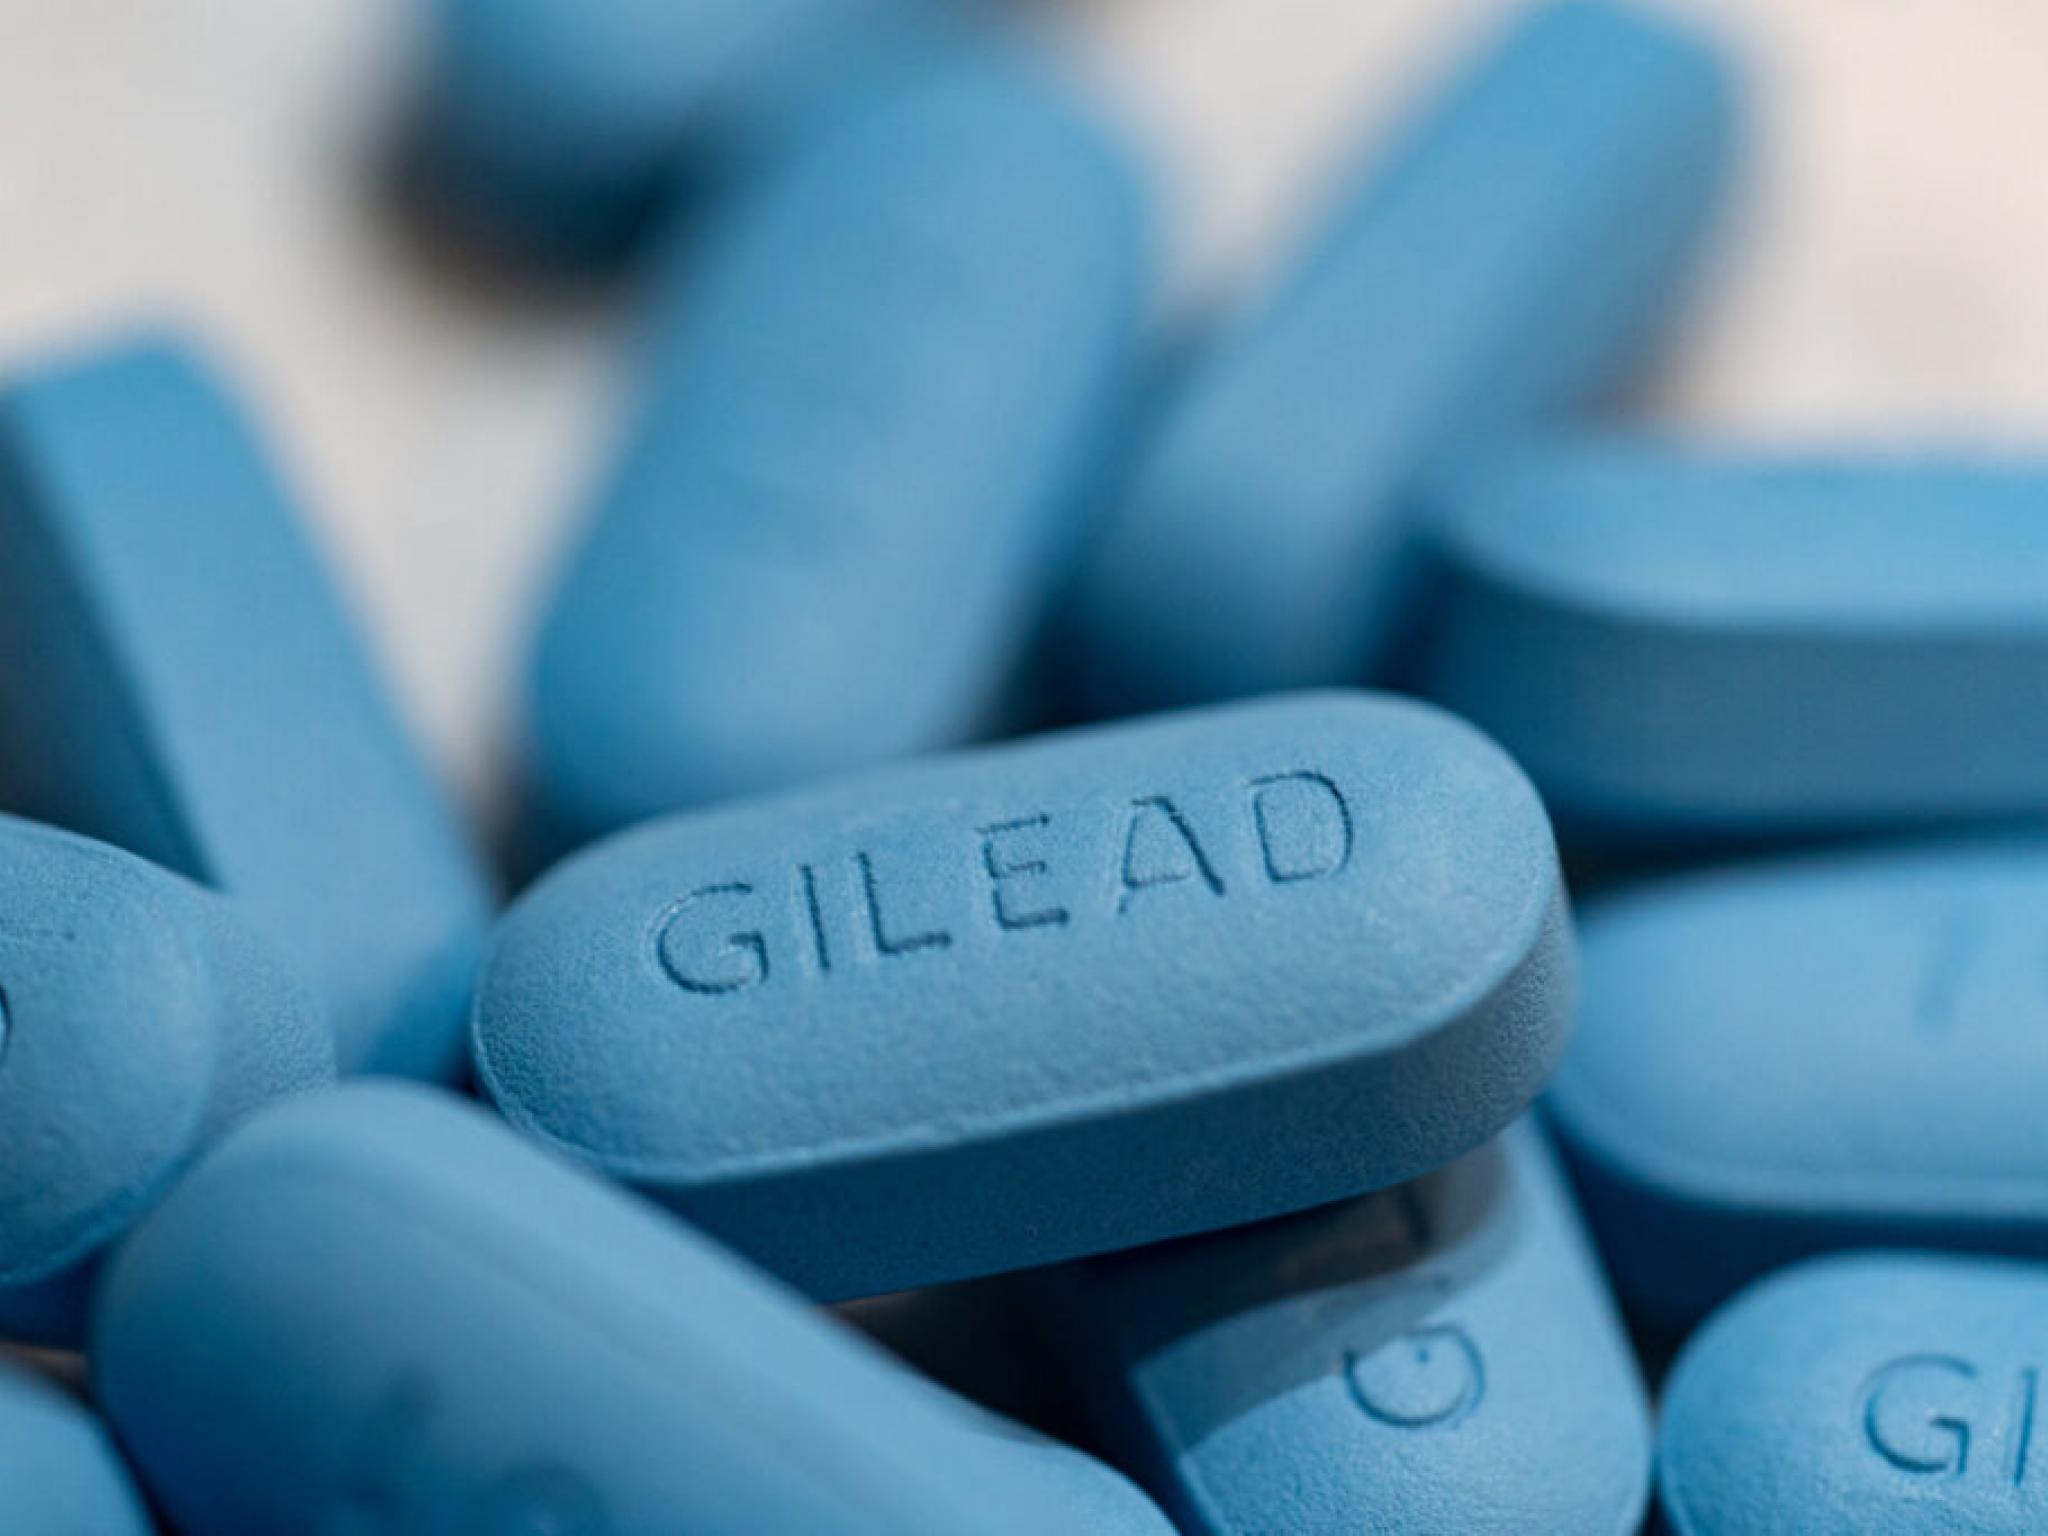  gileads-aggressive-push-beyond-hiv-treatments---plans-to-increase-cancer-focused-car-t-treatment-production 